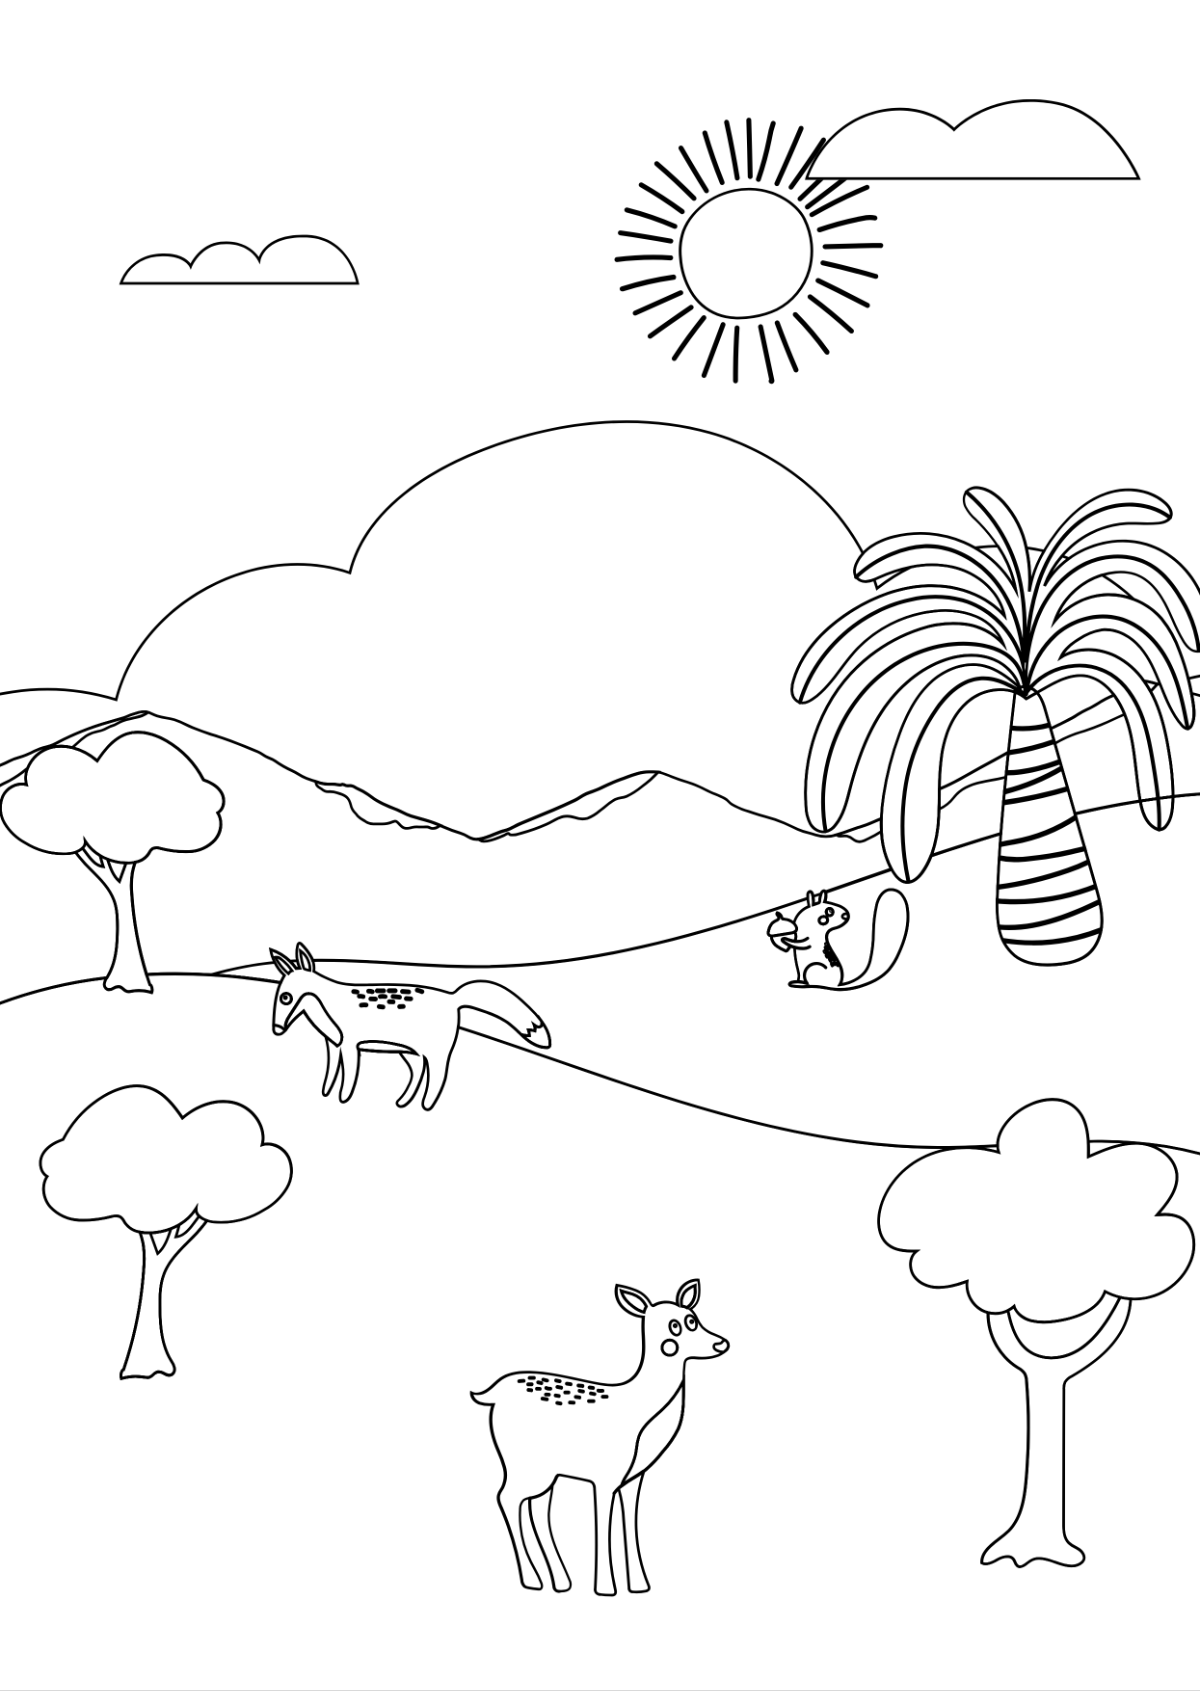 World Environment Day Drawing for Kids